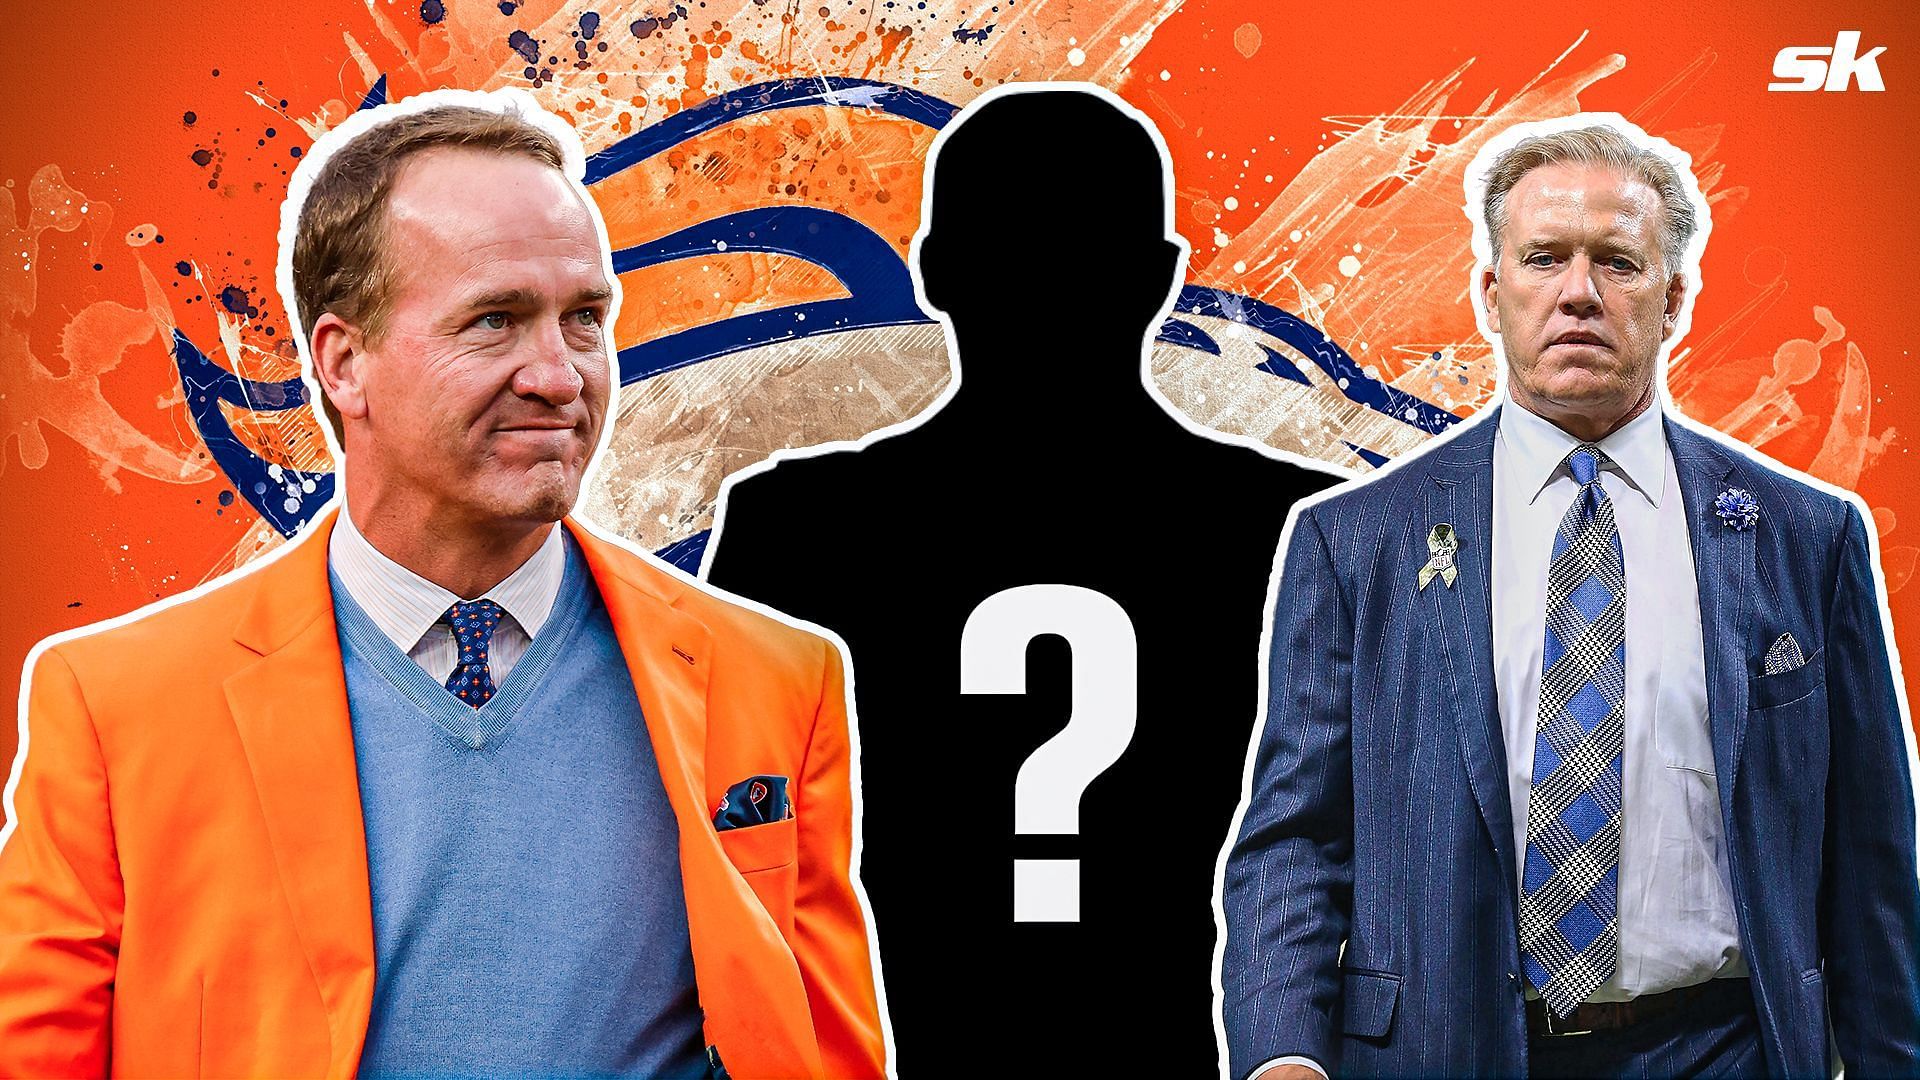 Who is the LA billionaire set to compete against Peyton Manning and John Elway for Broncos ownership?